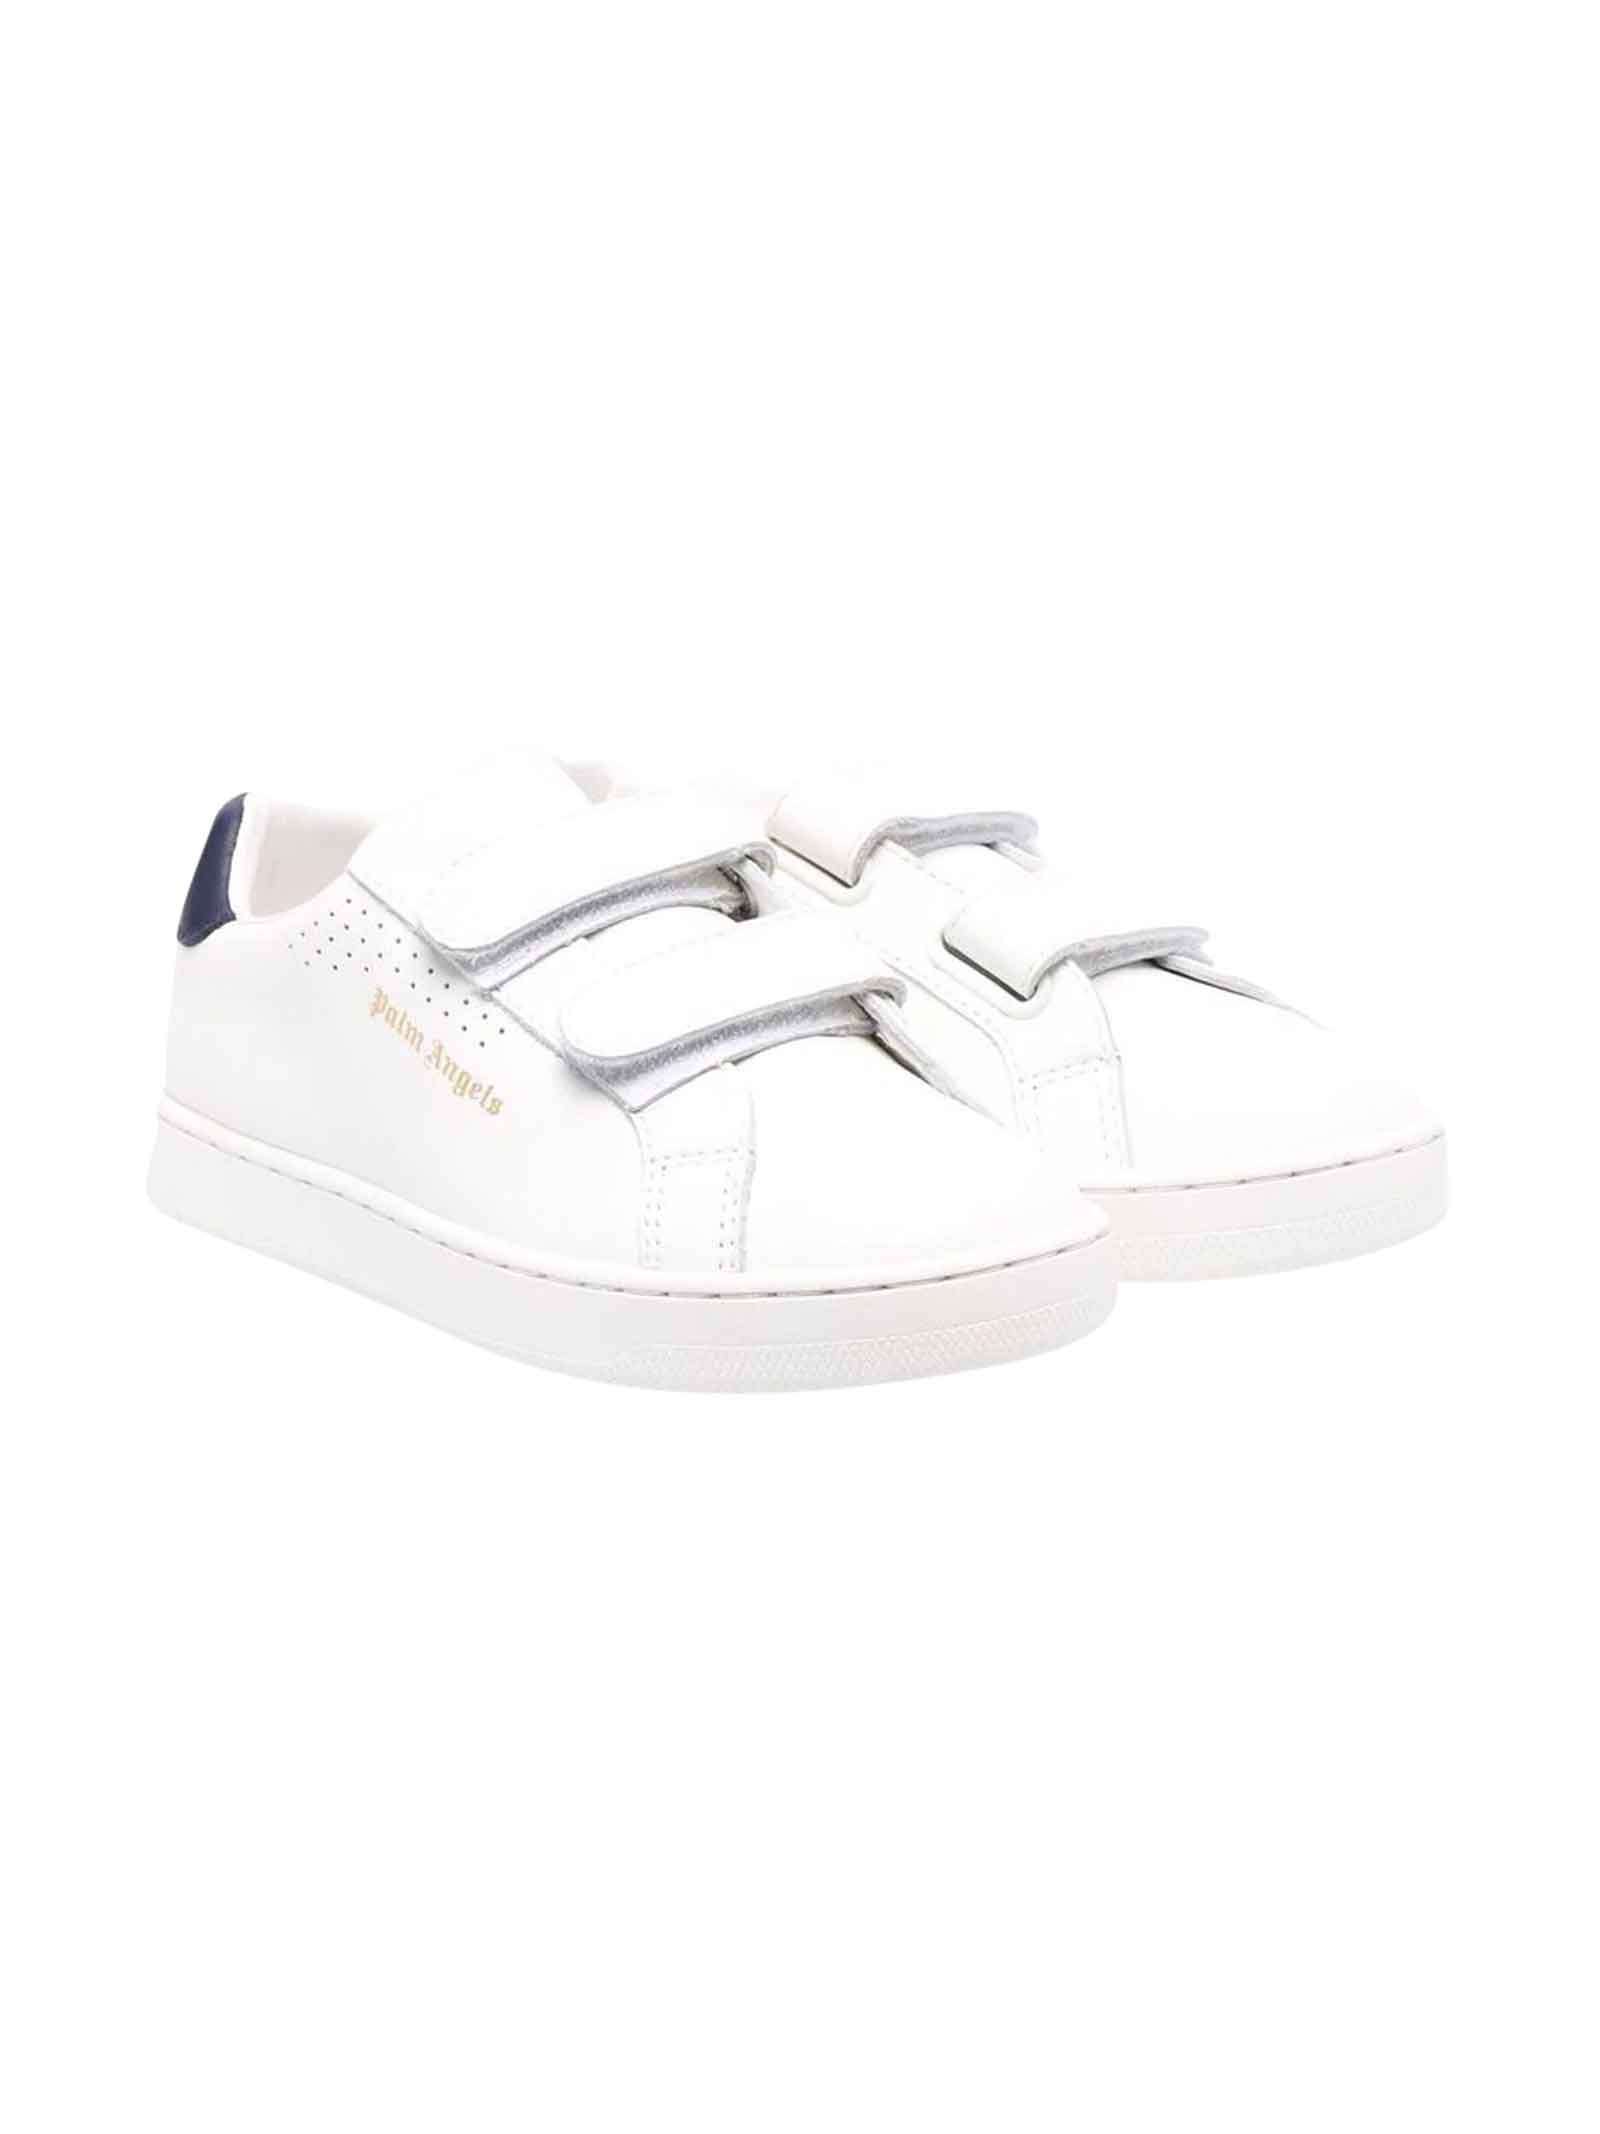 Palm Angels Unisex White Sneakers